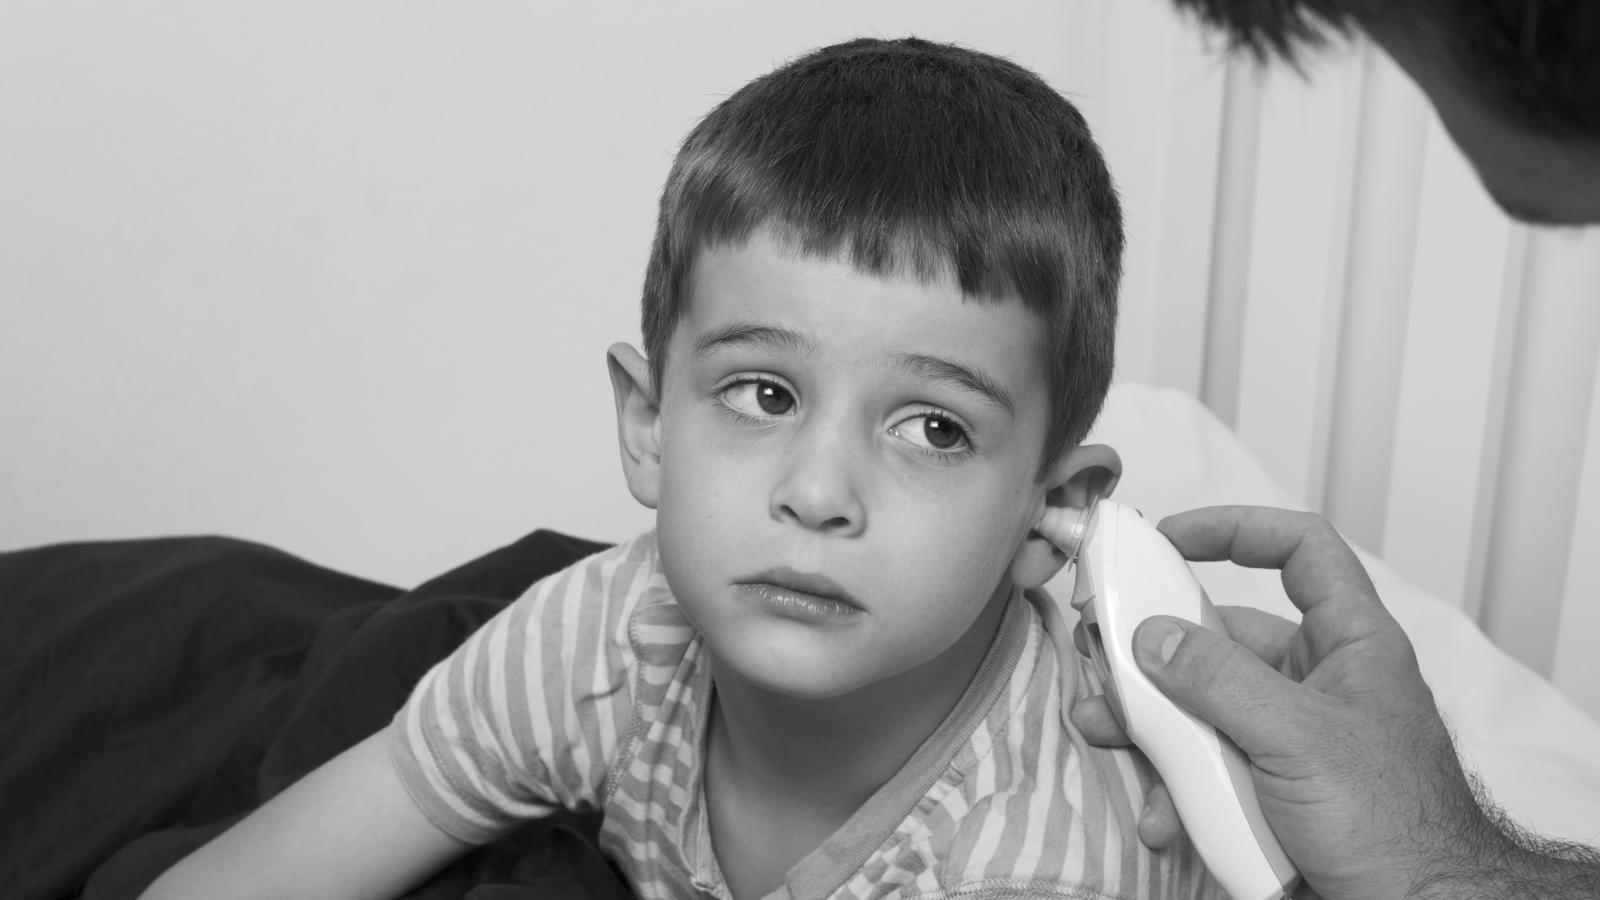 A boy gets his temperature taken with an ear thermometer